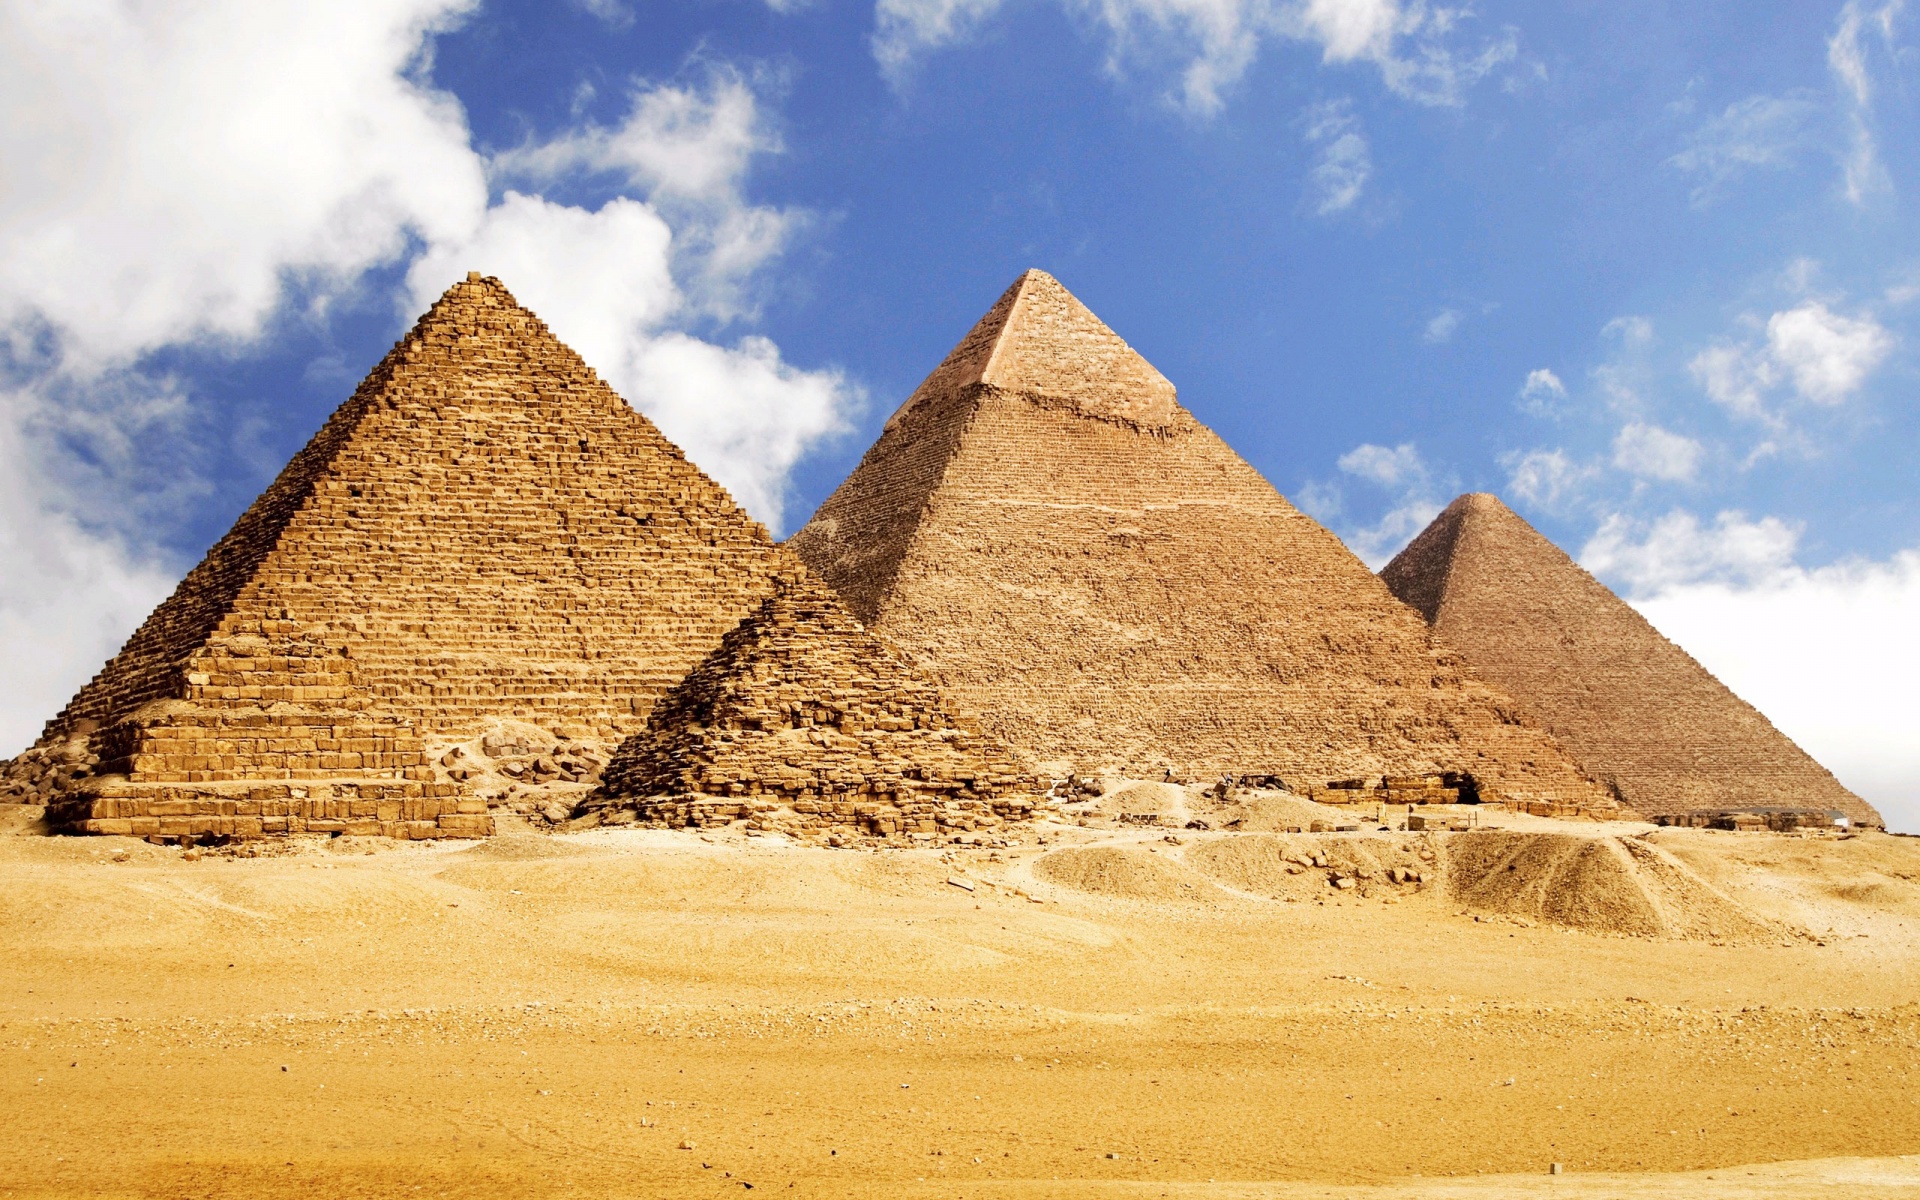 Egypt tour package from India including Pyramids | Club 7 Holidays